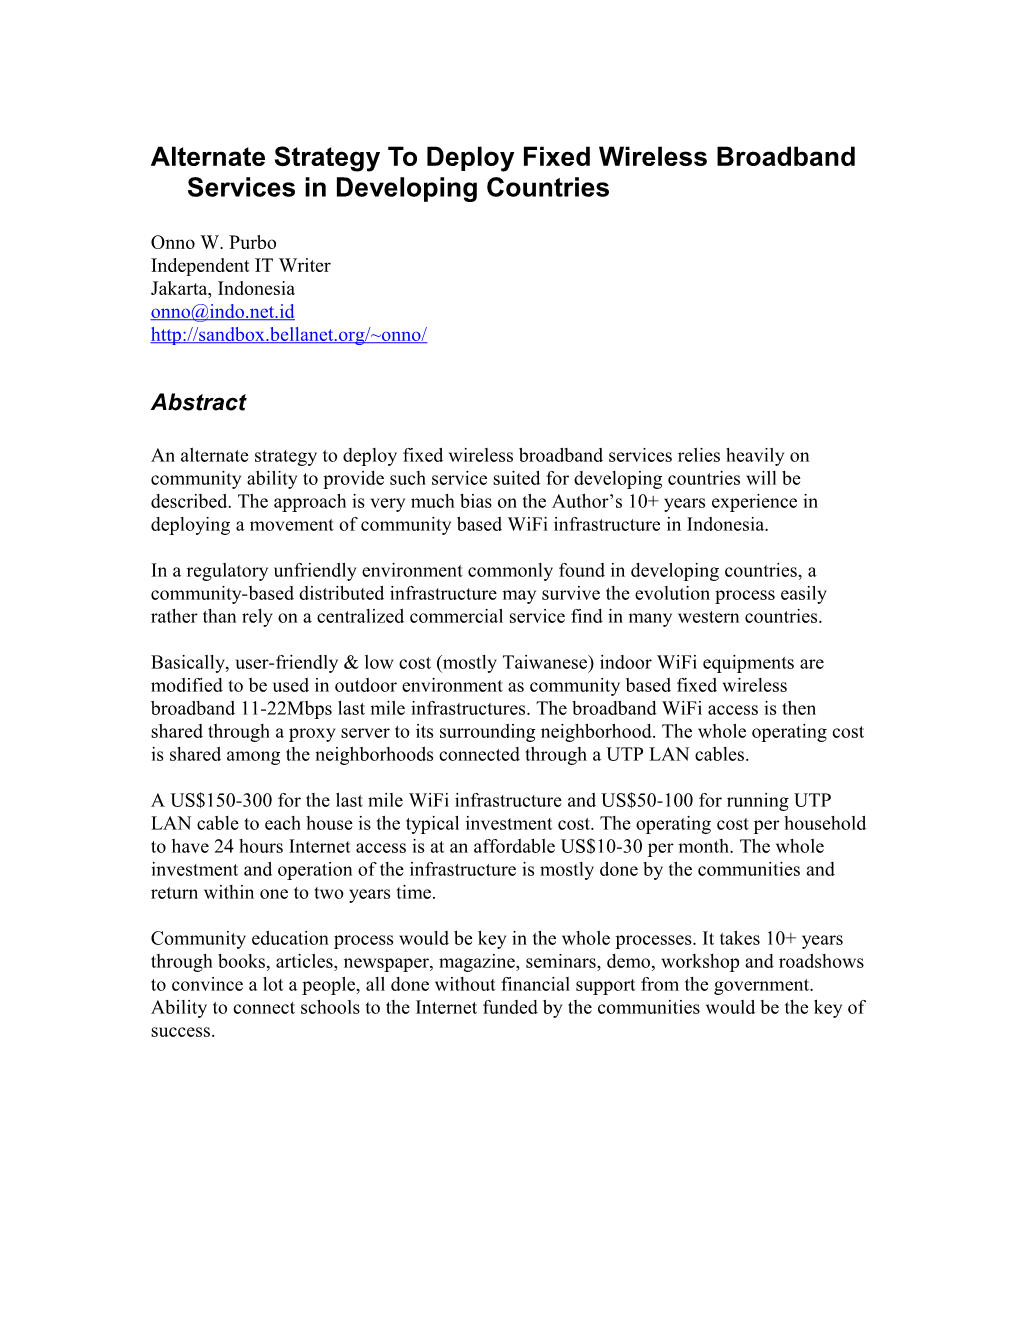 Alternate Strategy to Deploy Fixed Wireless Broadband Services in Developing Countries